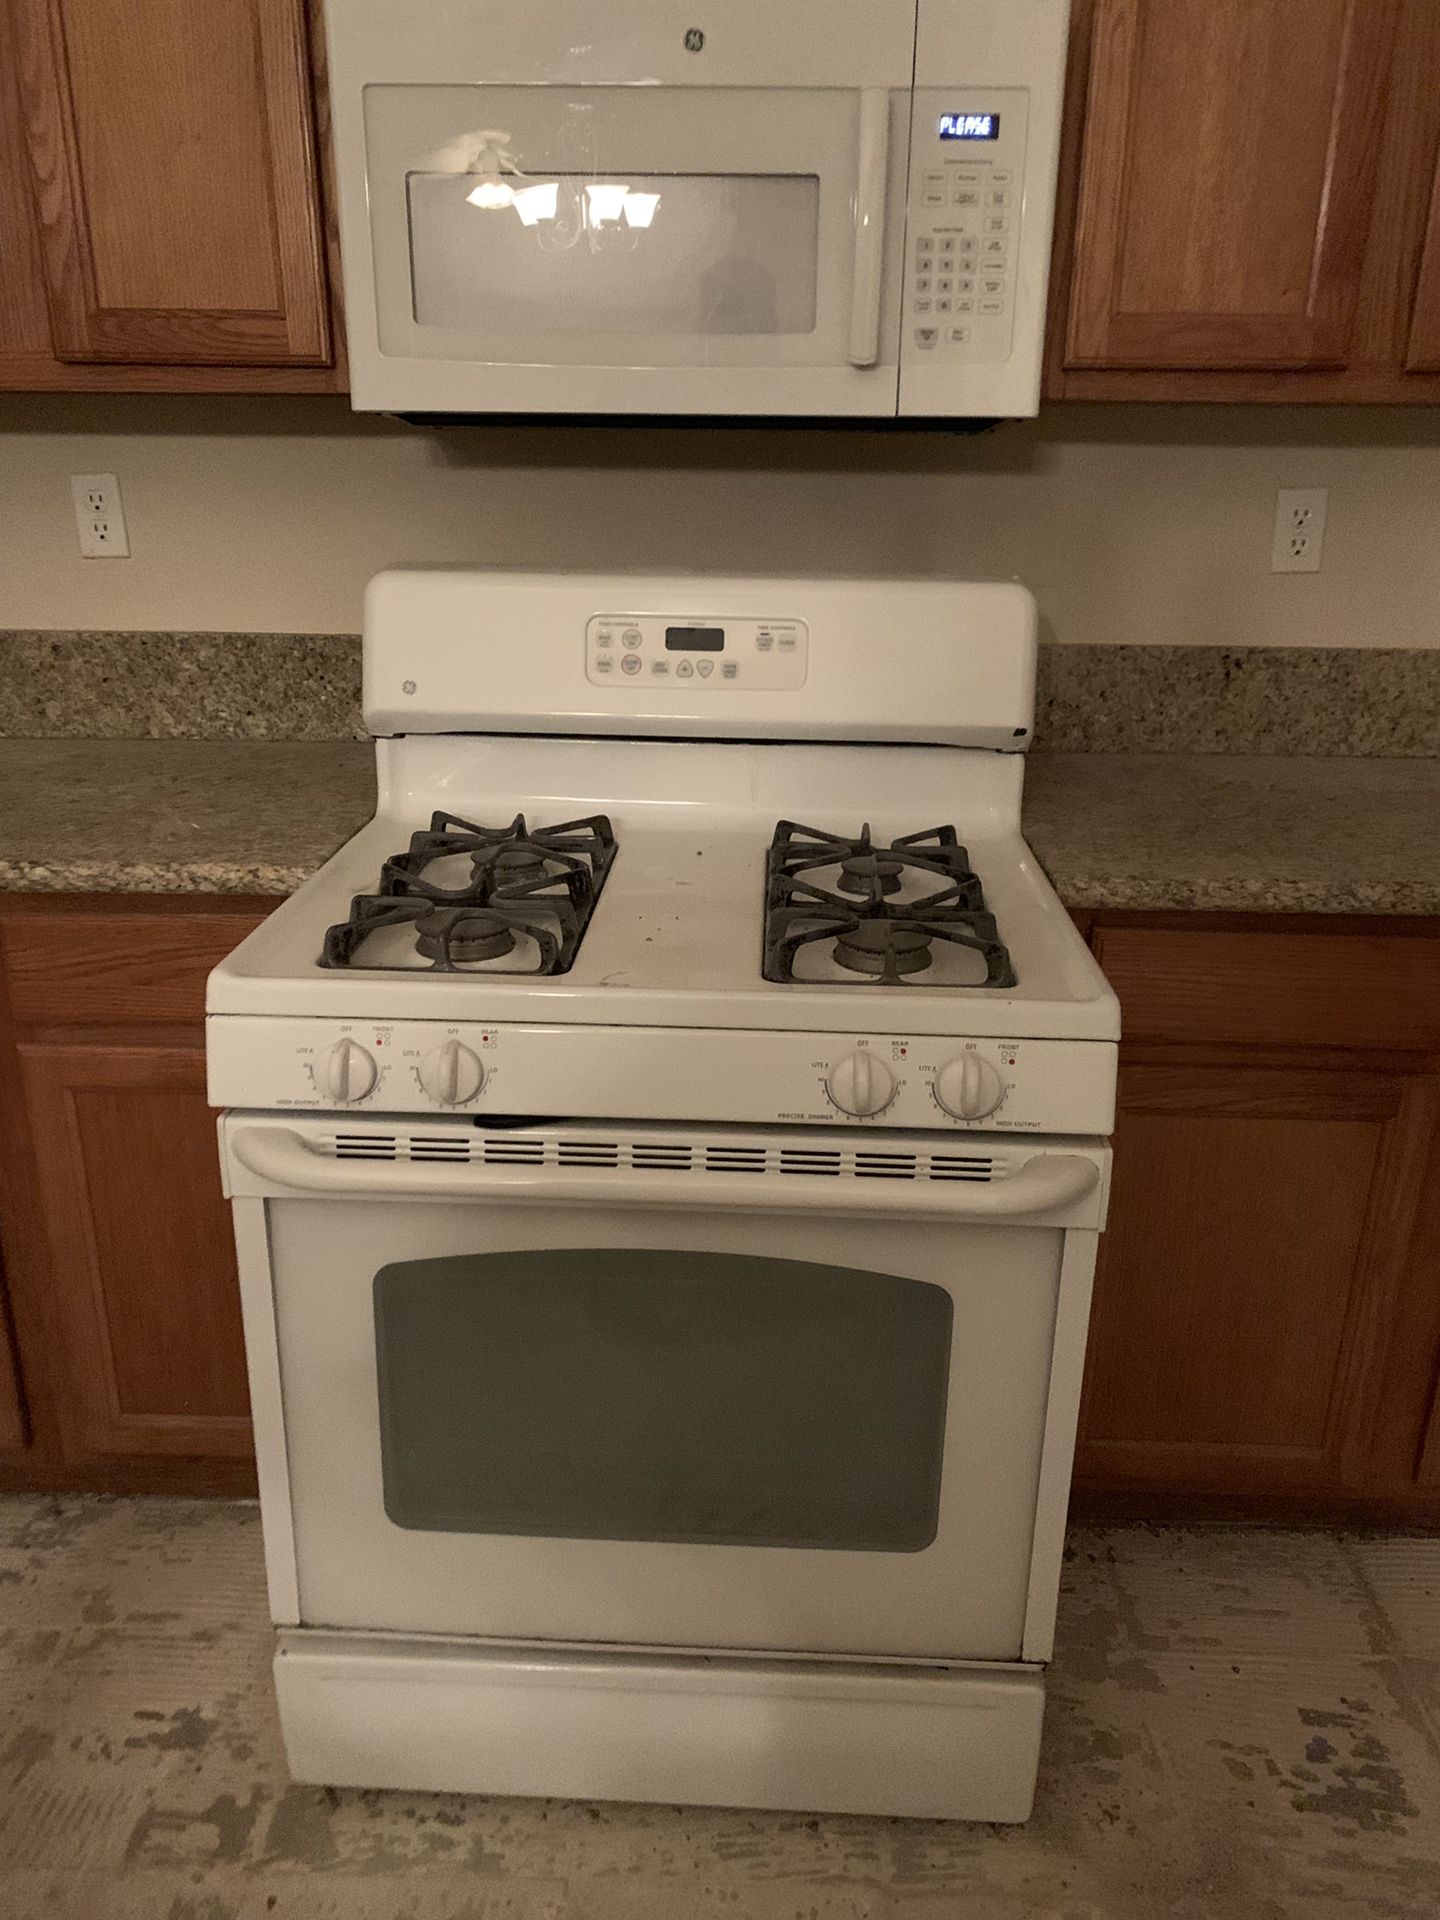 GE oven, microwave and dishwasher for sale. $500